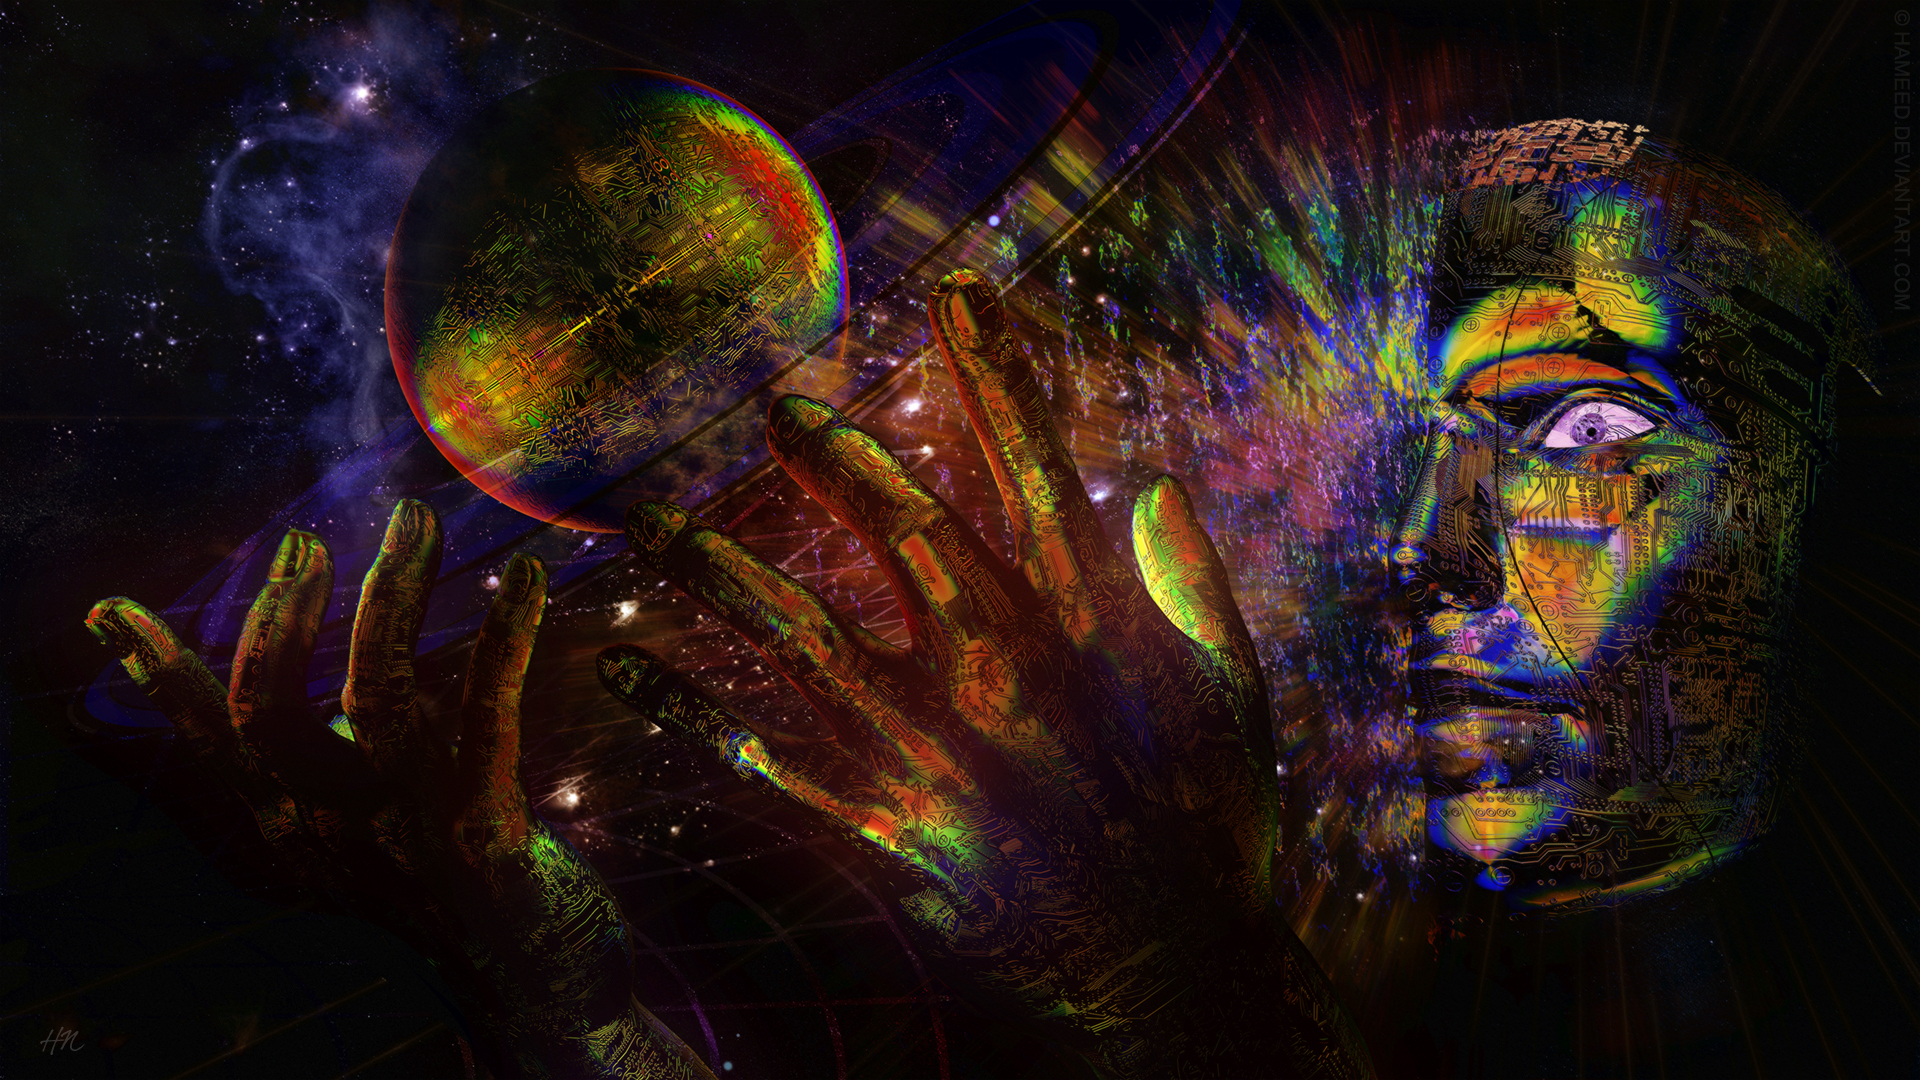 Psychedelic Cg Digital Art Sci Fi Science Space Universe Surreal Mood Emotion Color Planets Hands Face Eyes Stars Space Magic Creation Religion God Wallpapers Hd Desktop And Mobile Backgrounds